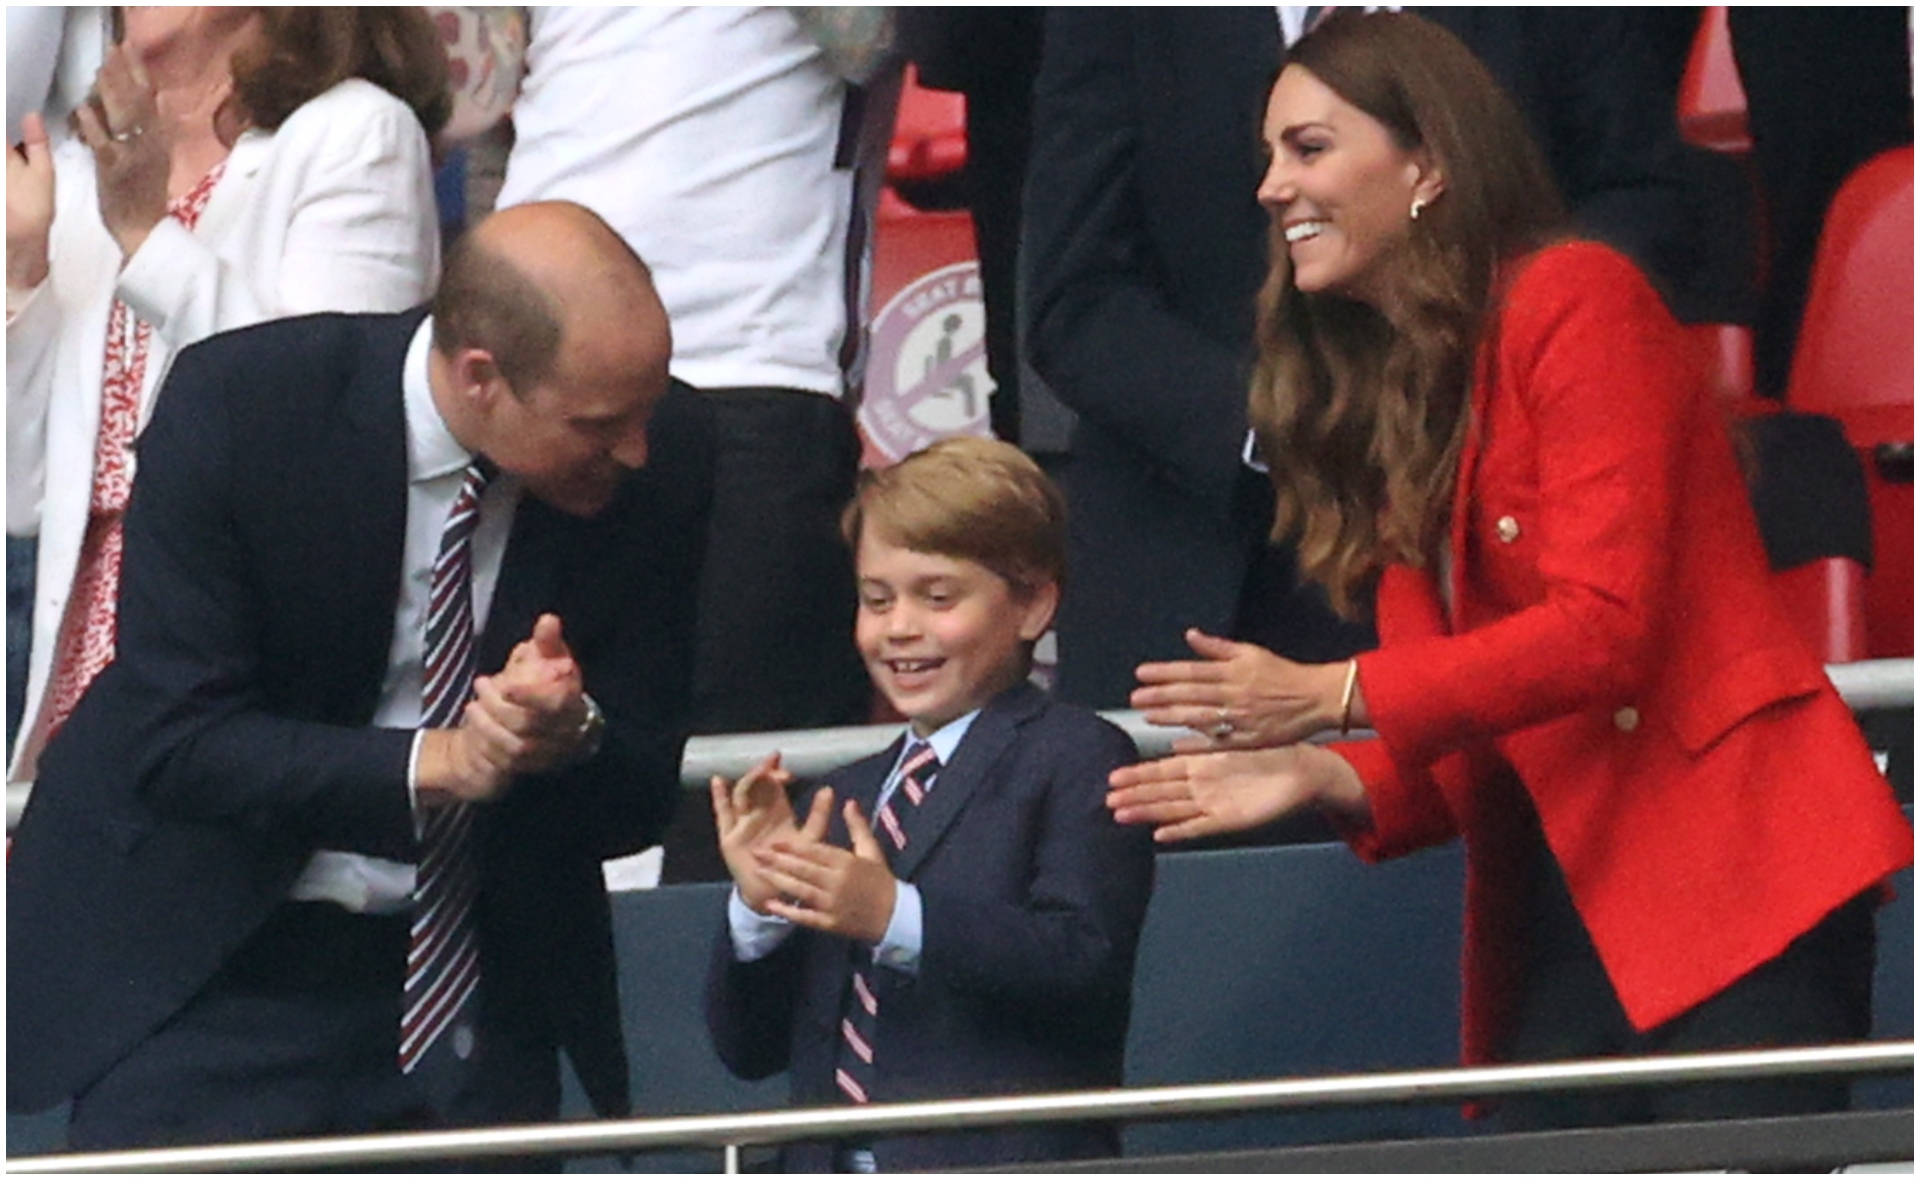 Seven-year-old Prince George just showed up to the soccer in a mini matching suit to his dad, Prince William – let that sink in